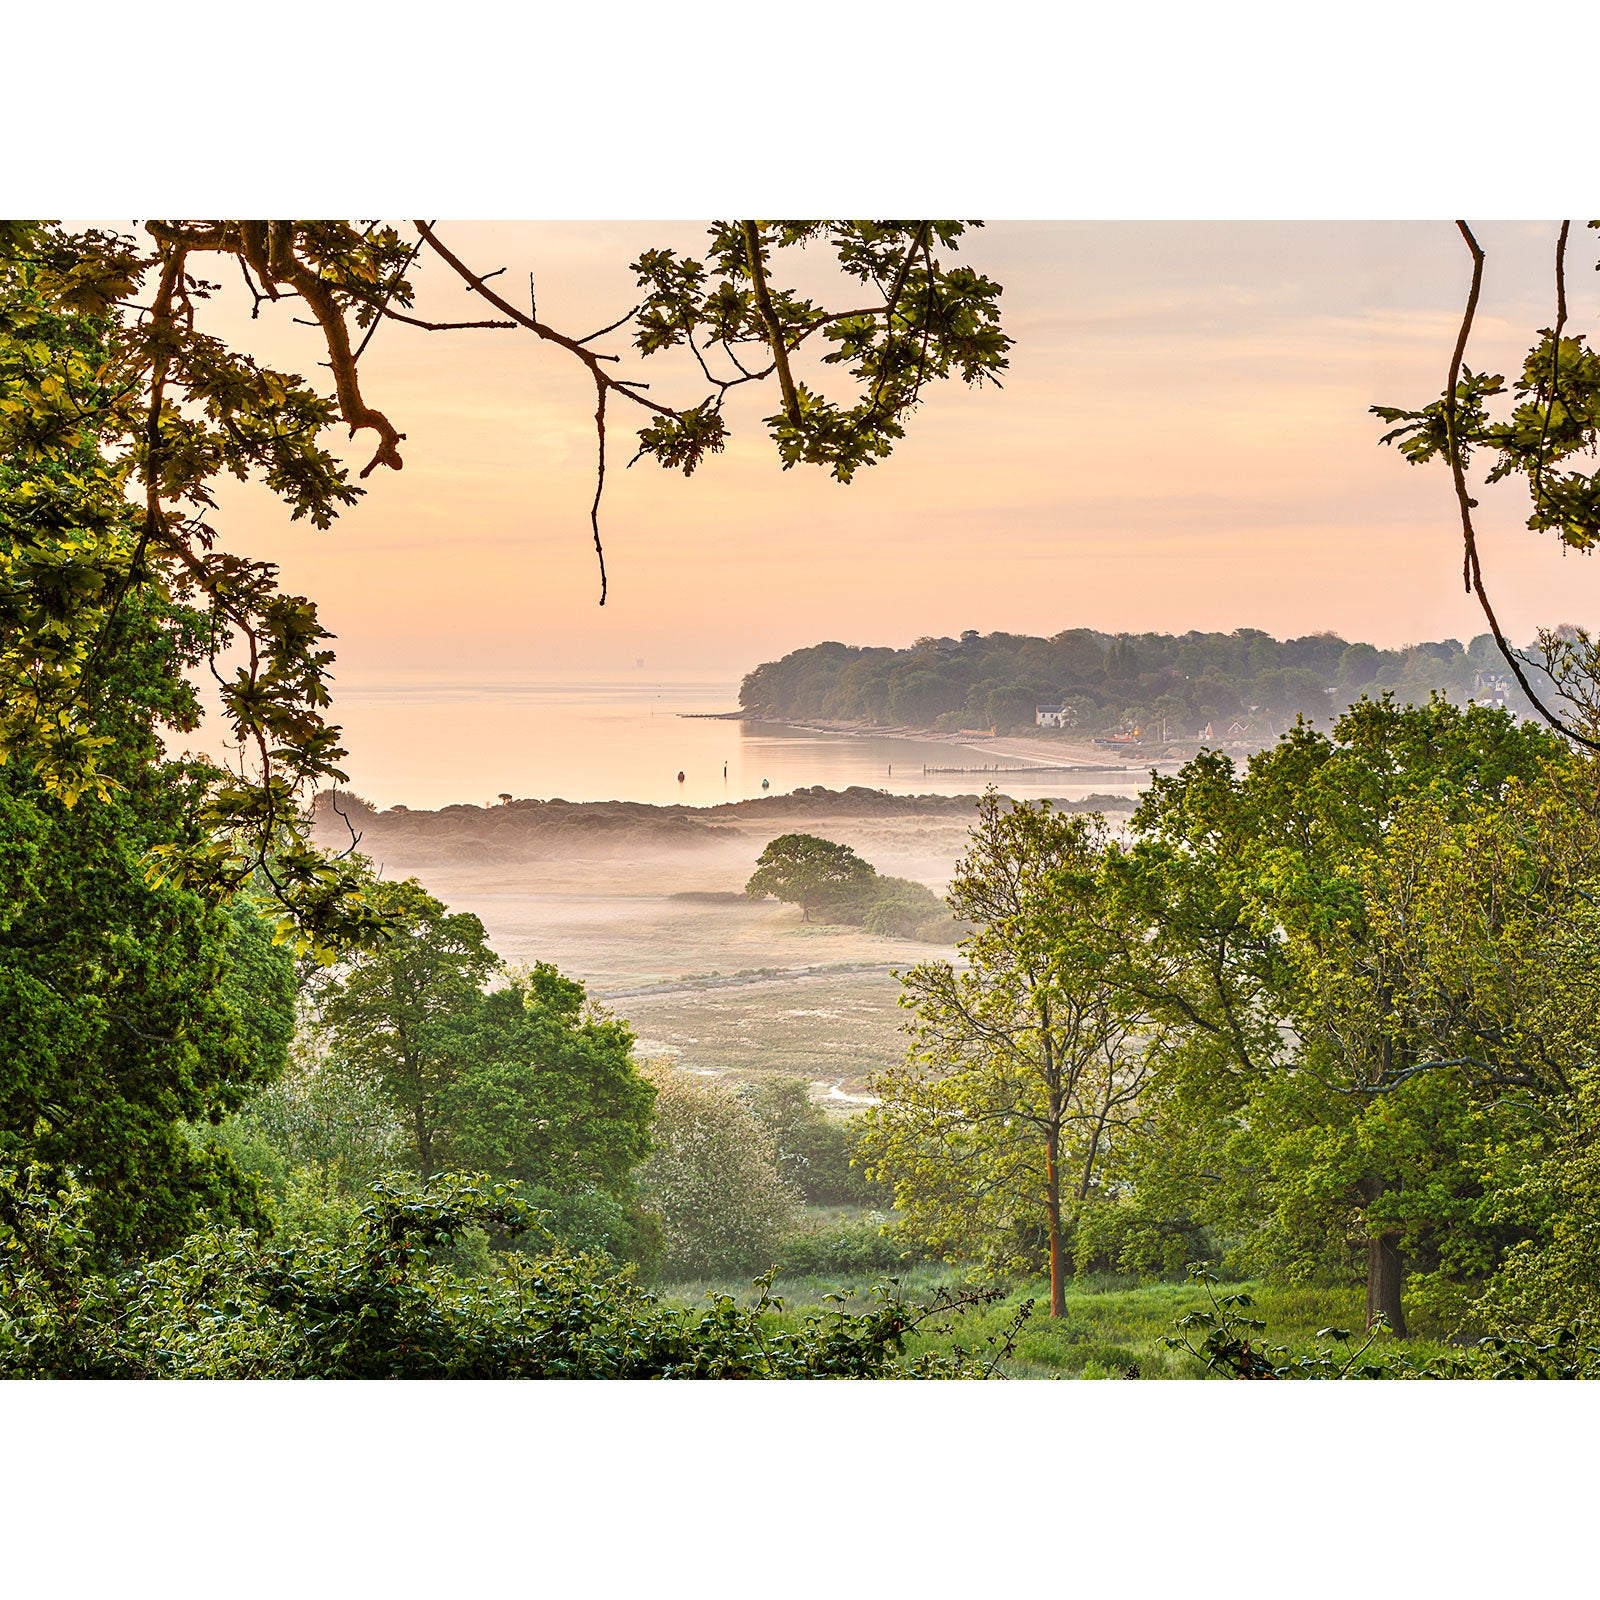 A tranquil sunrise over a coastal landscape on the Isle, with trees framing the view, captured beautifully by The Duver from Available Light Photography.